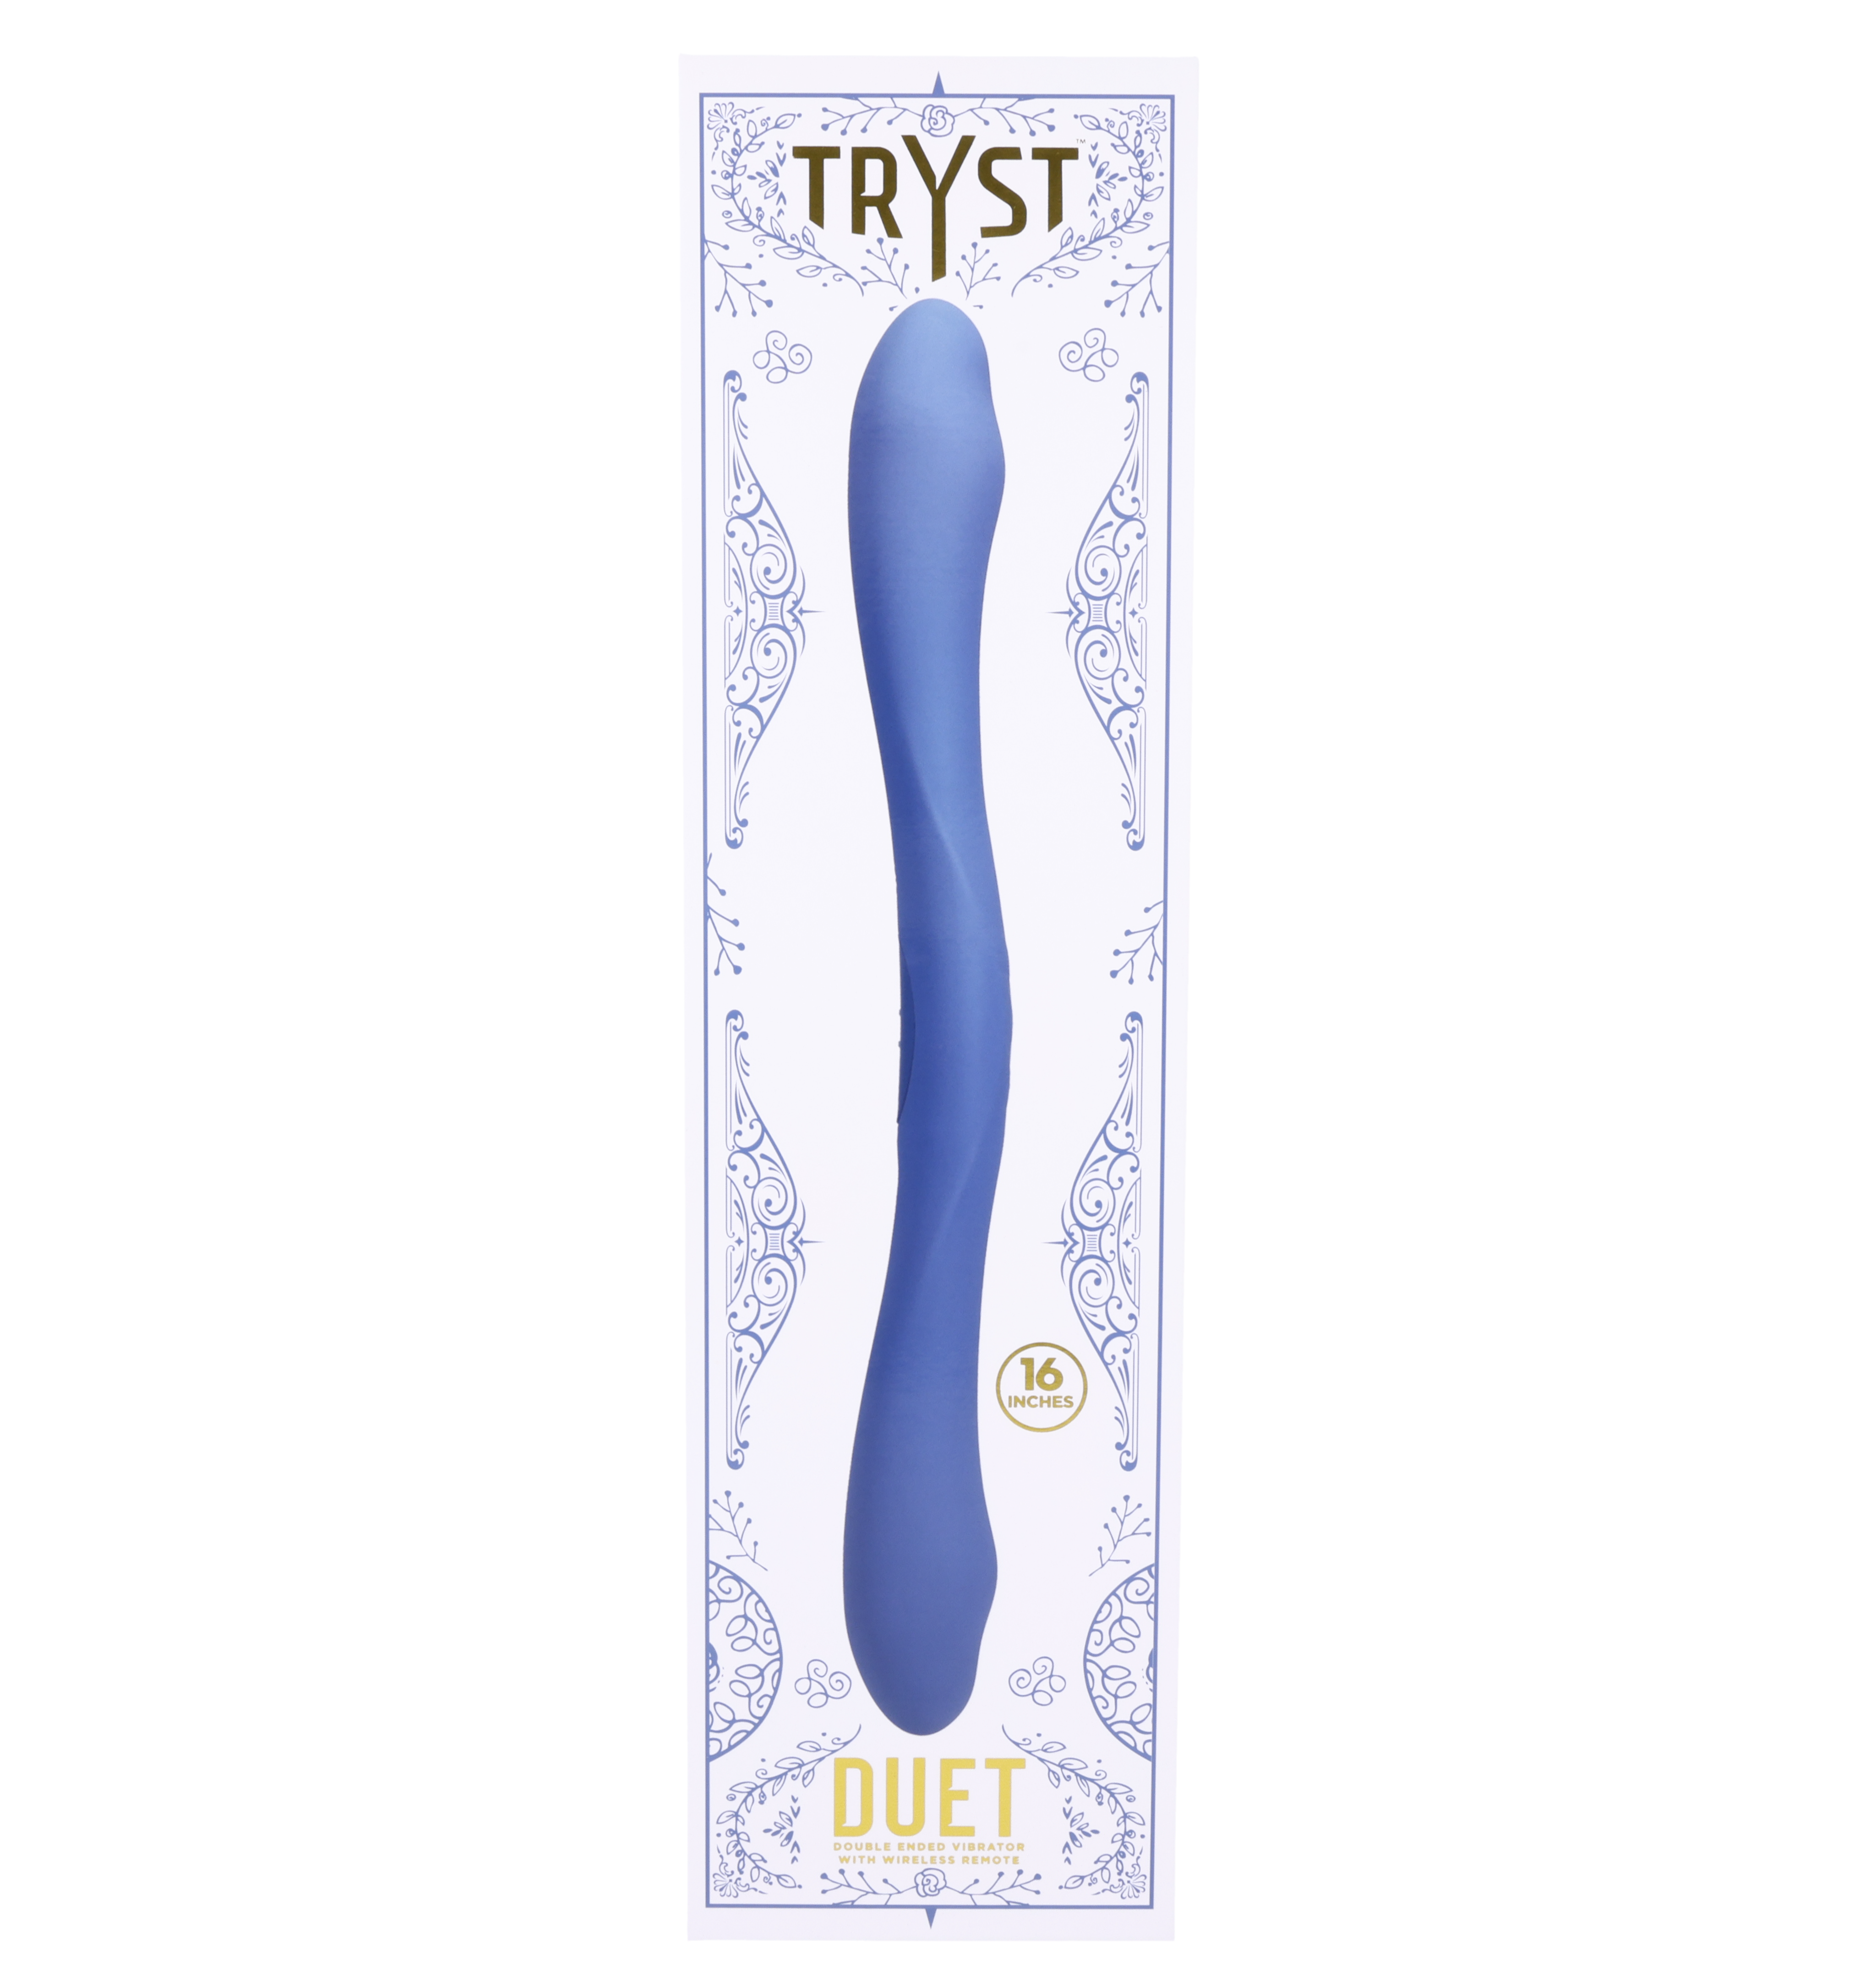 Tryst - Duet -  Double Ended Vibrator with Wireless Remote